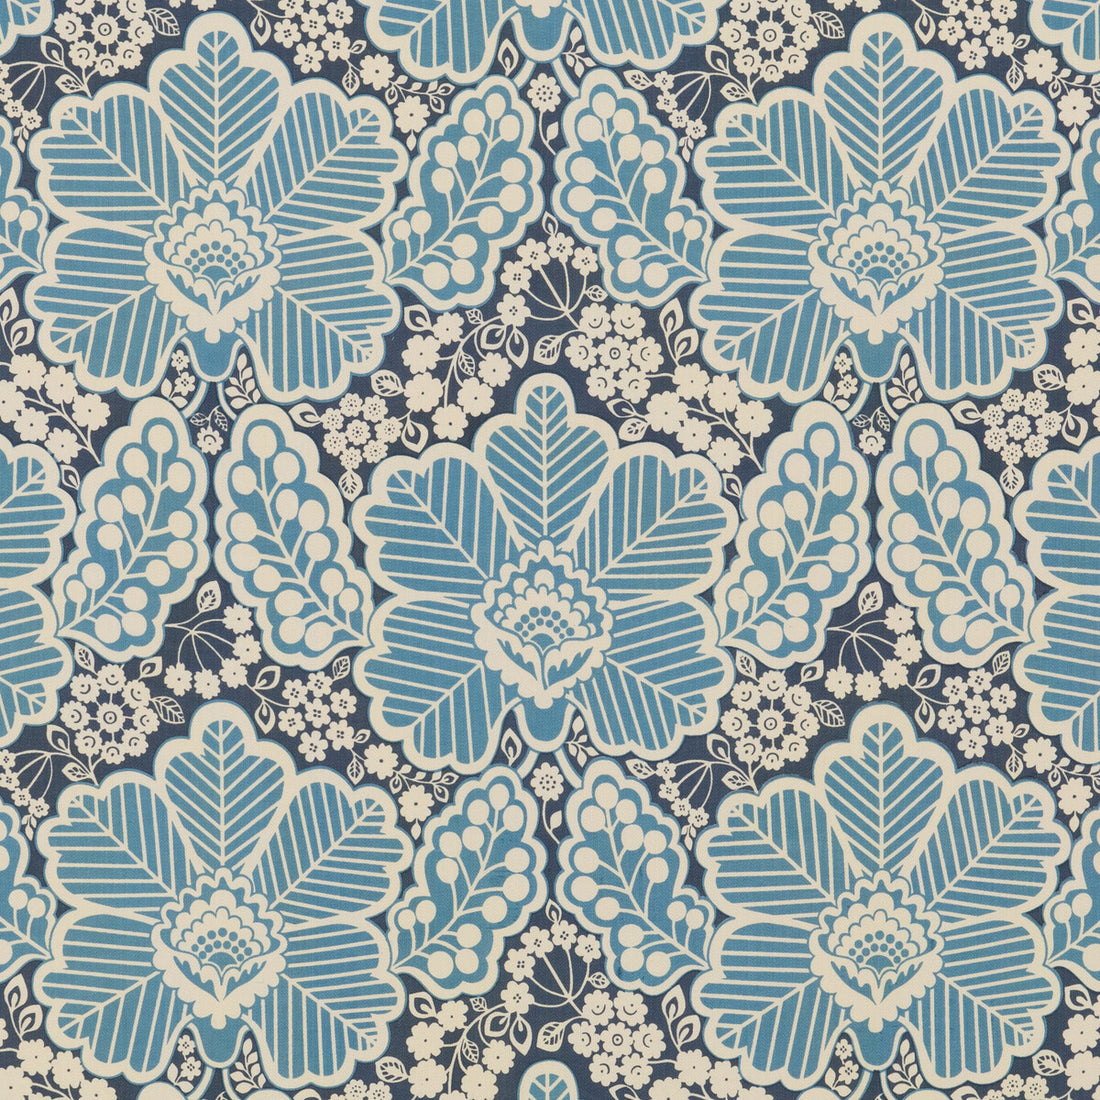 Arbour fabric in indigo color - pattern PP50479.1.0 - by Baker Lifestyle in the Block Party collection